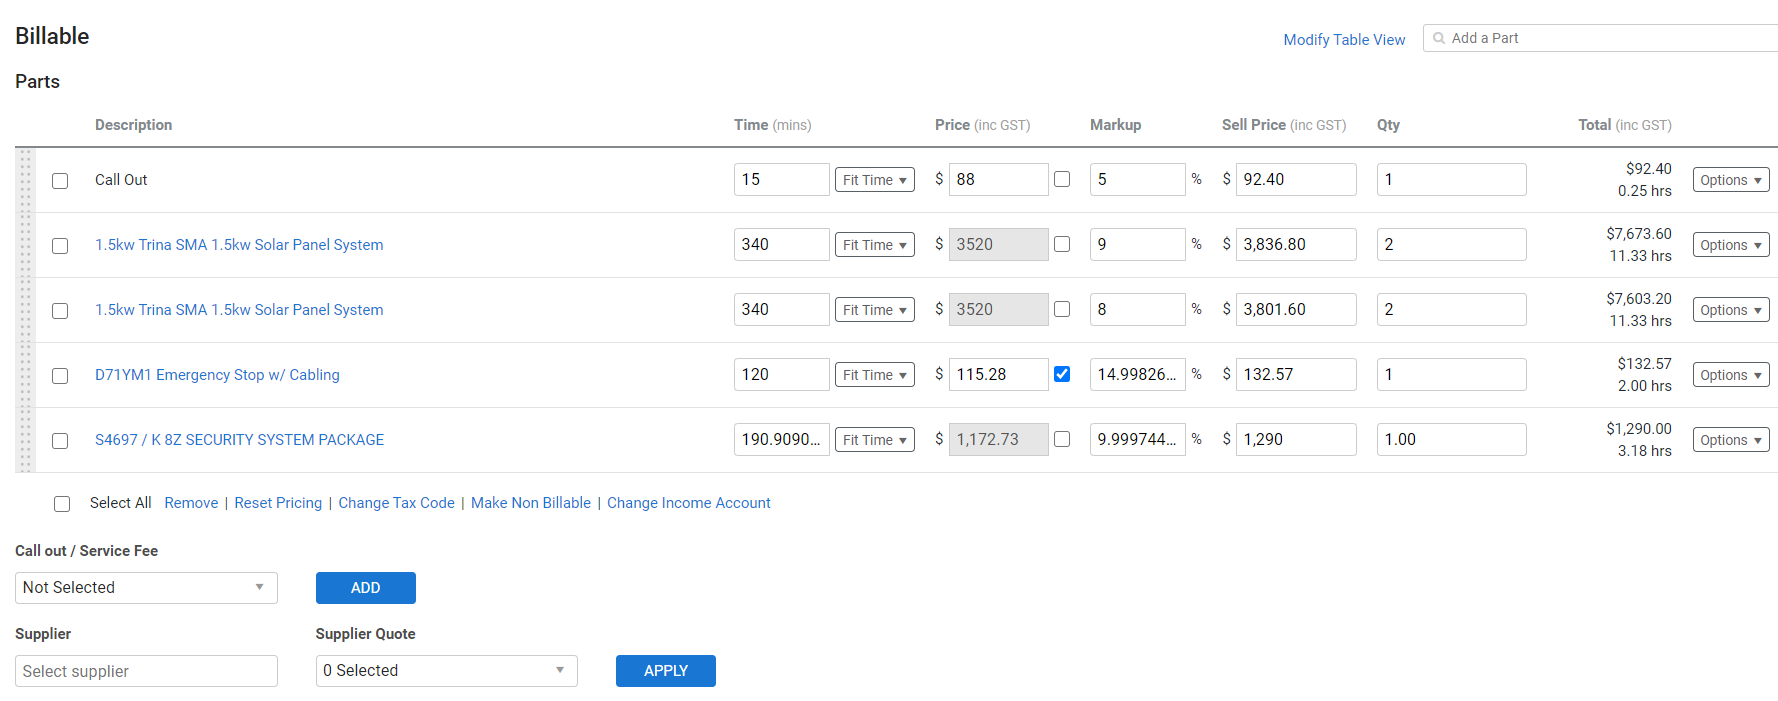 A screenshot of the options available for billable parts.